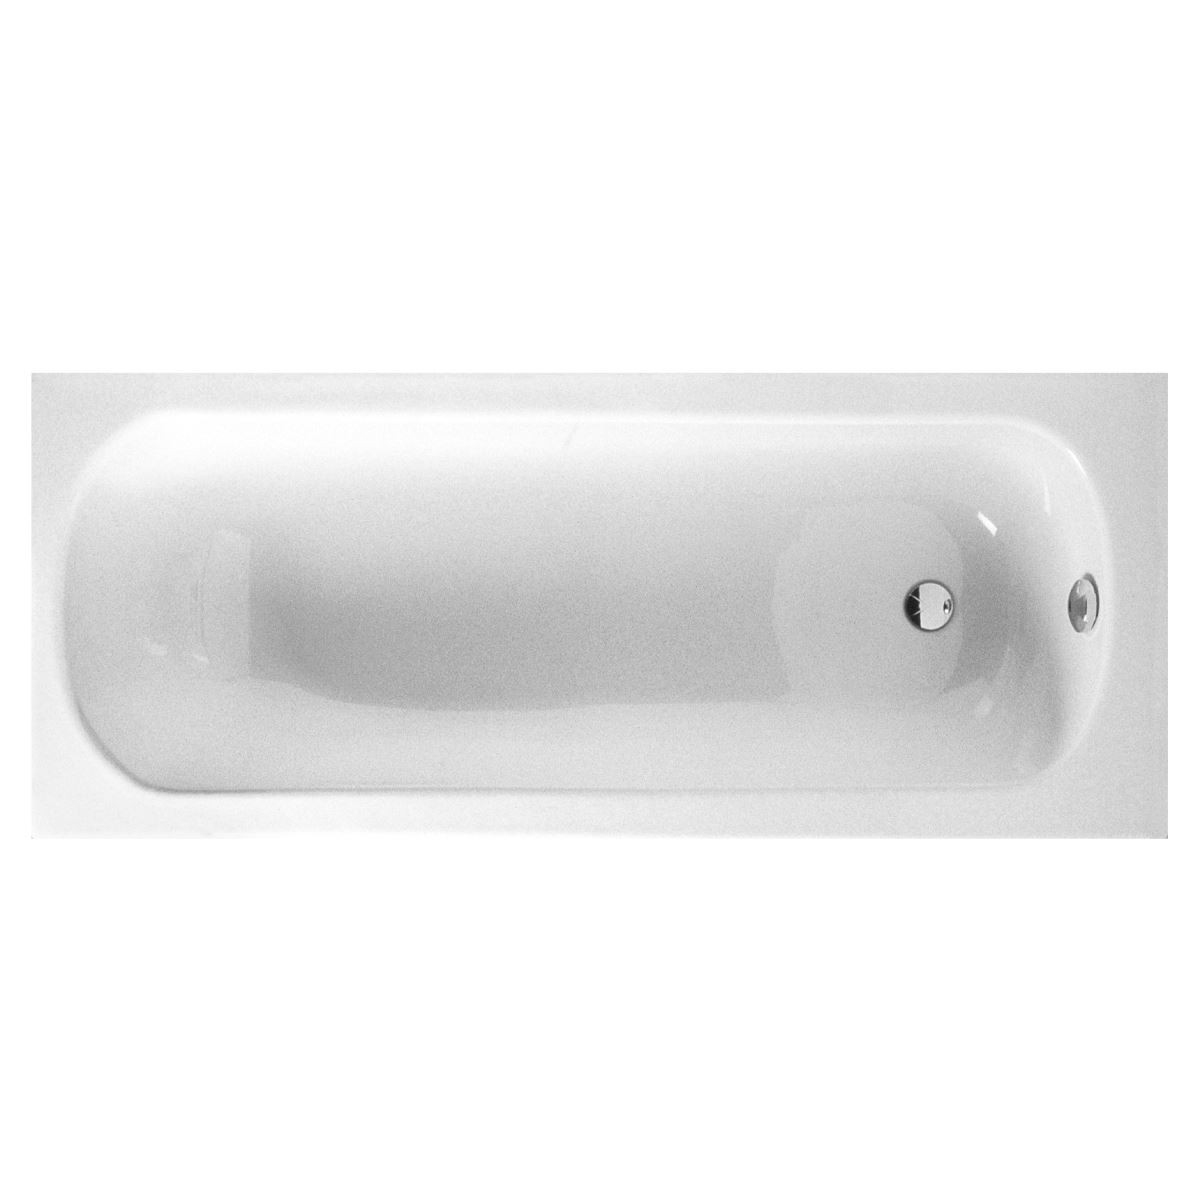 VitrA Optima Single Ended Bath 1700 x 700mm [50820001000] [BATH ONLY - PANELS AND LEG SET NOT INCLUDED]